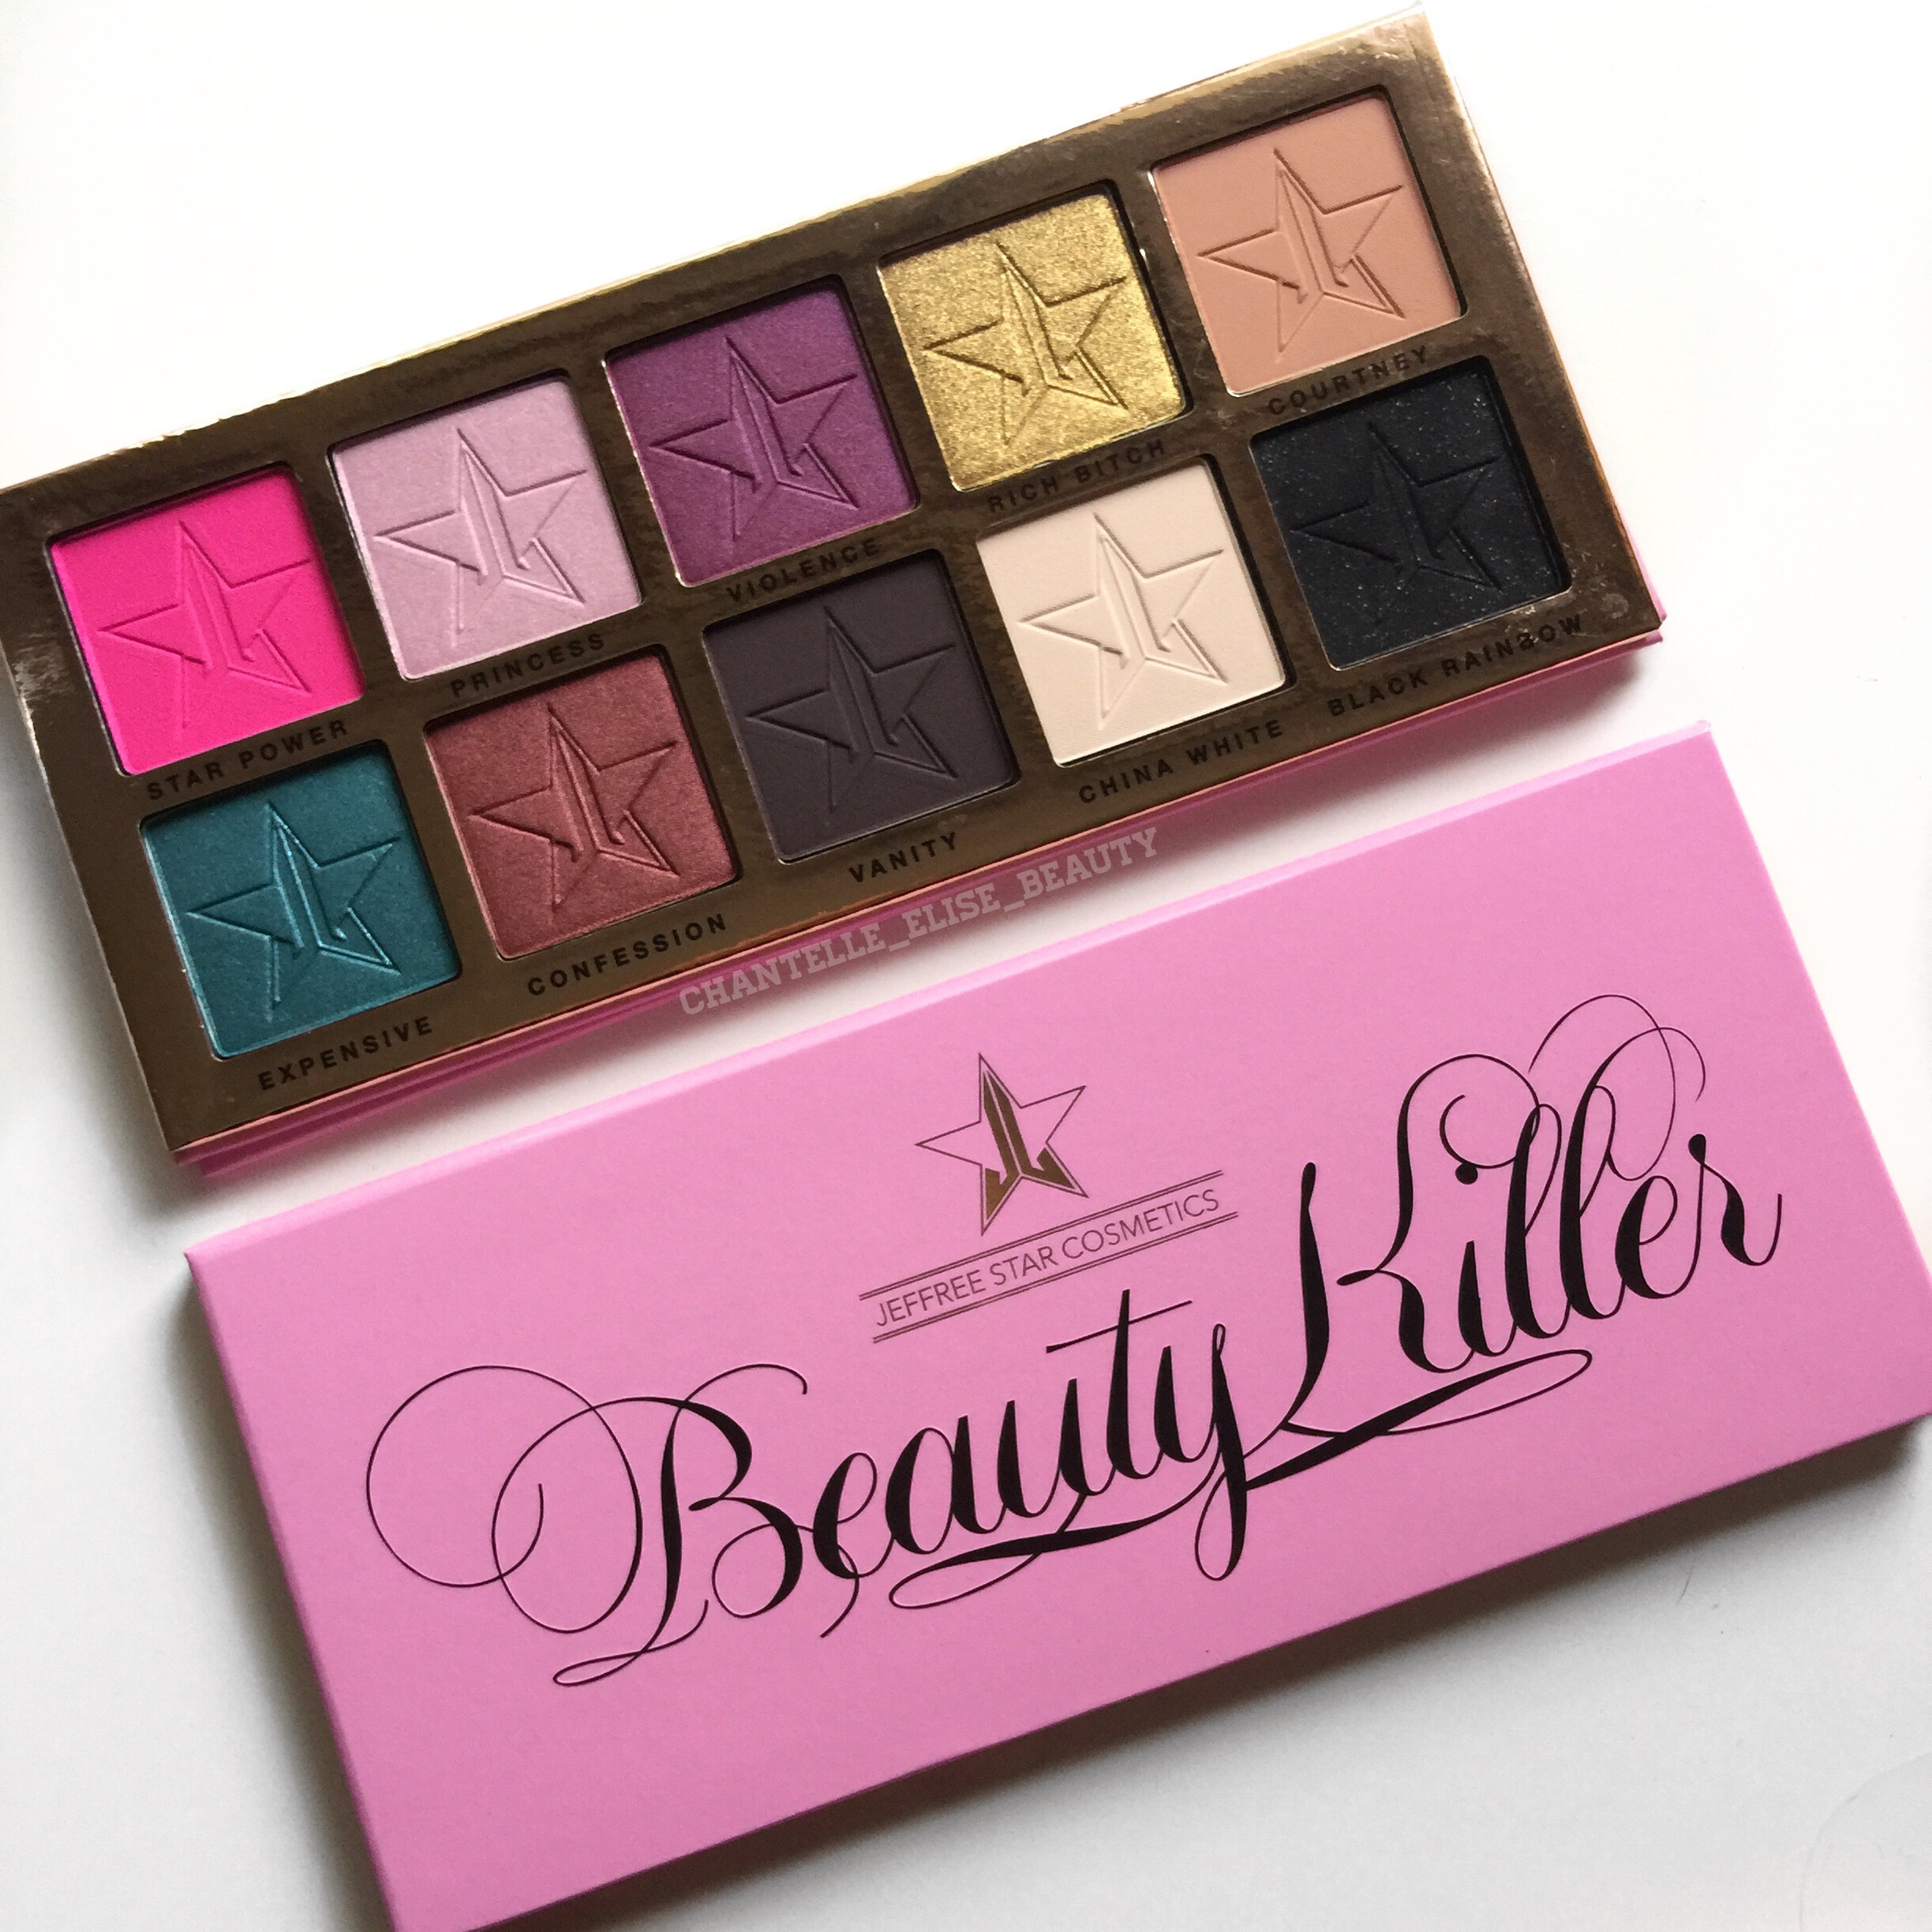 I Was Disappointed in Jeffree Star’s Androgyny Palette | Her Campus